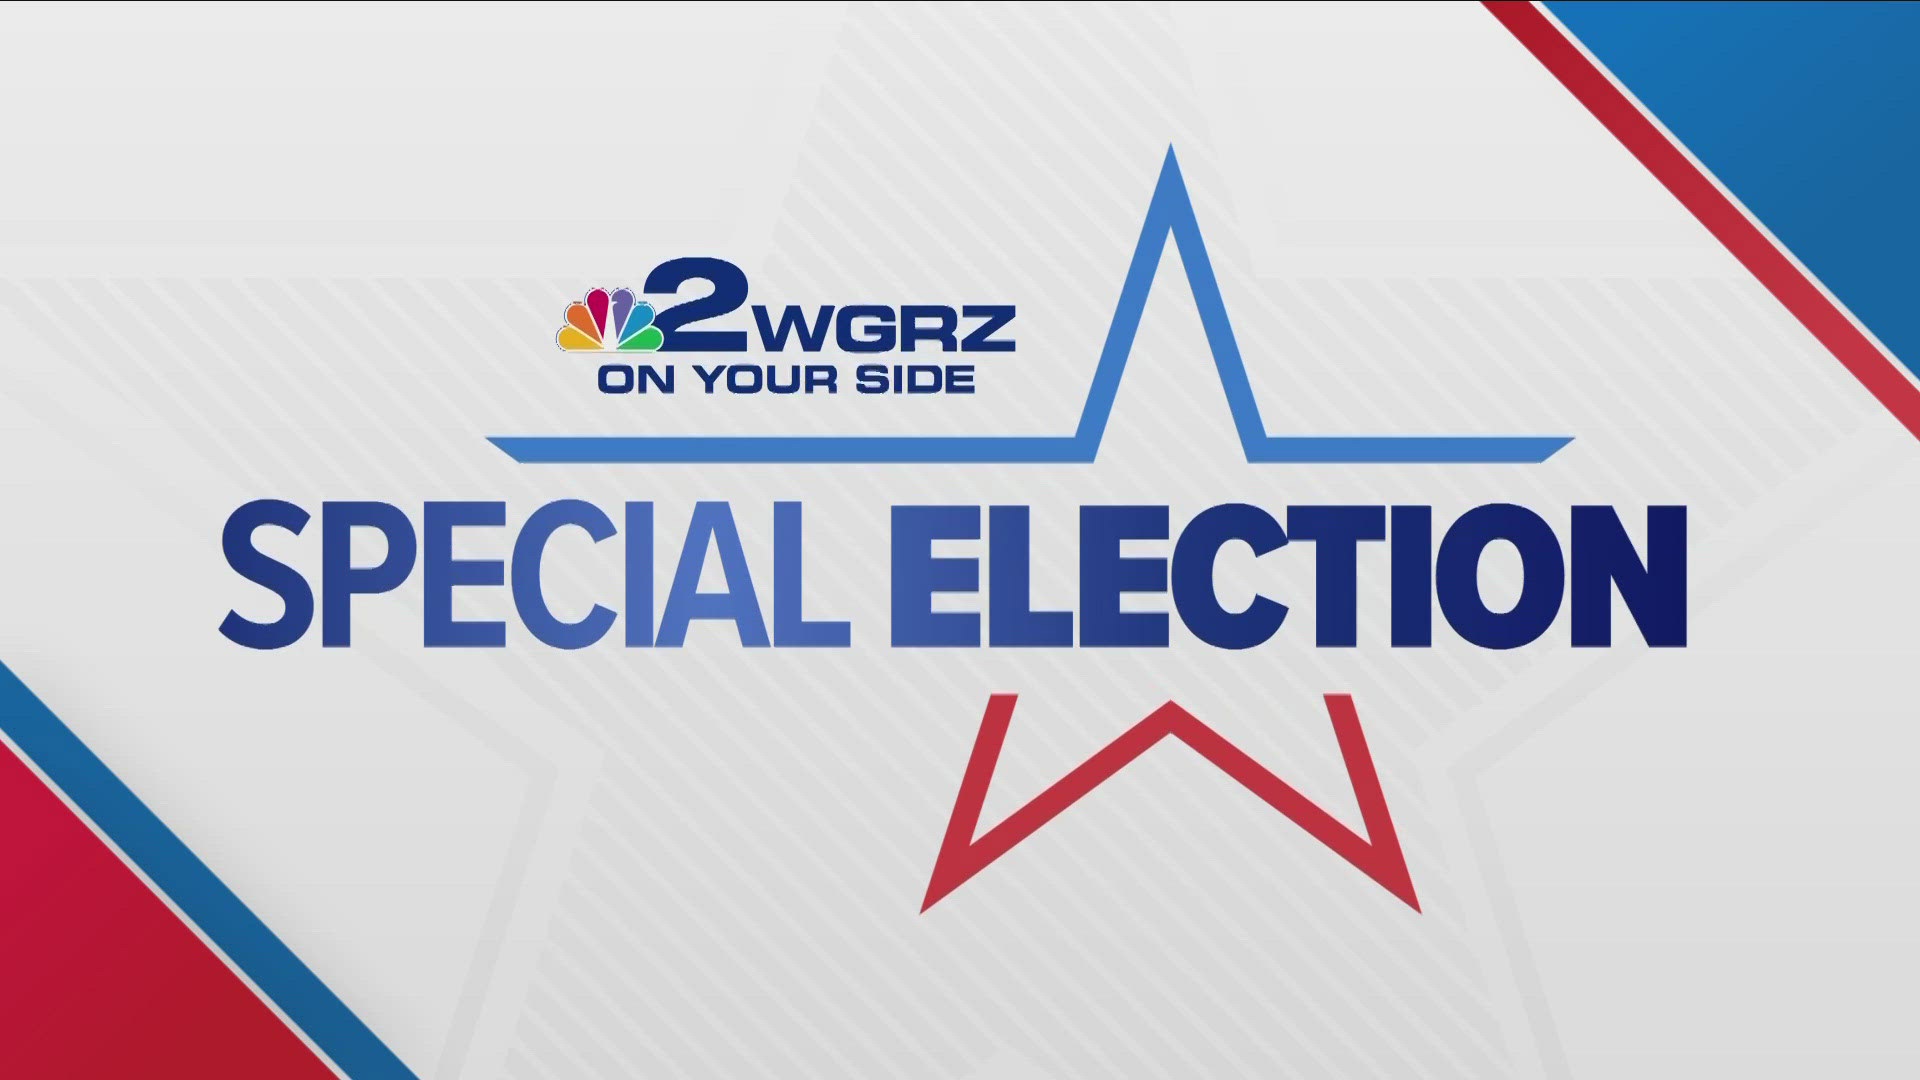 Early voting is already underway with the regular election set for Tuesday, April 30.